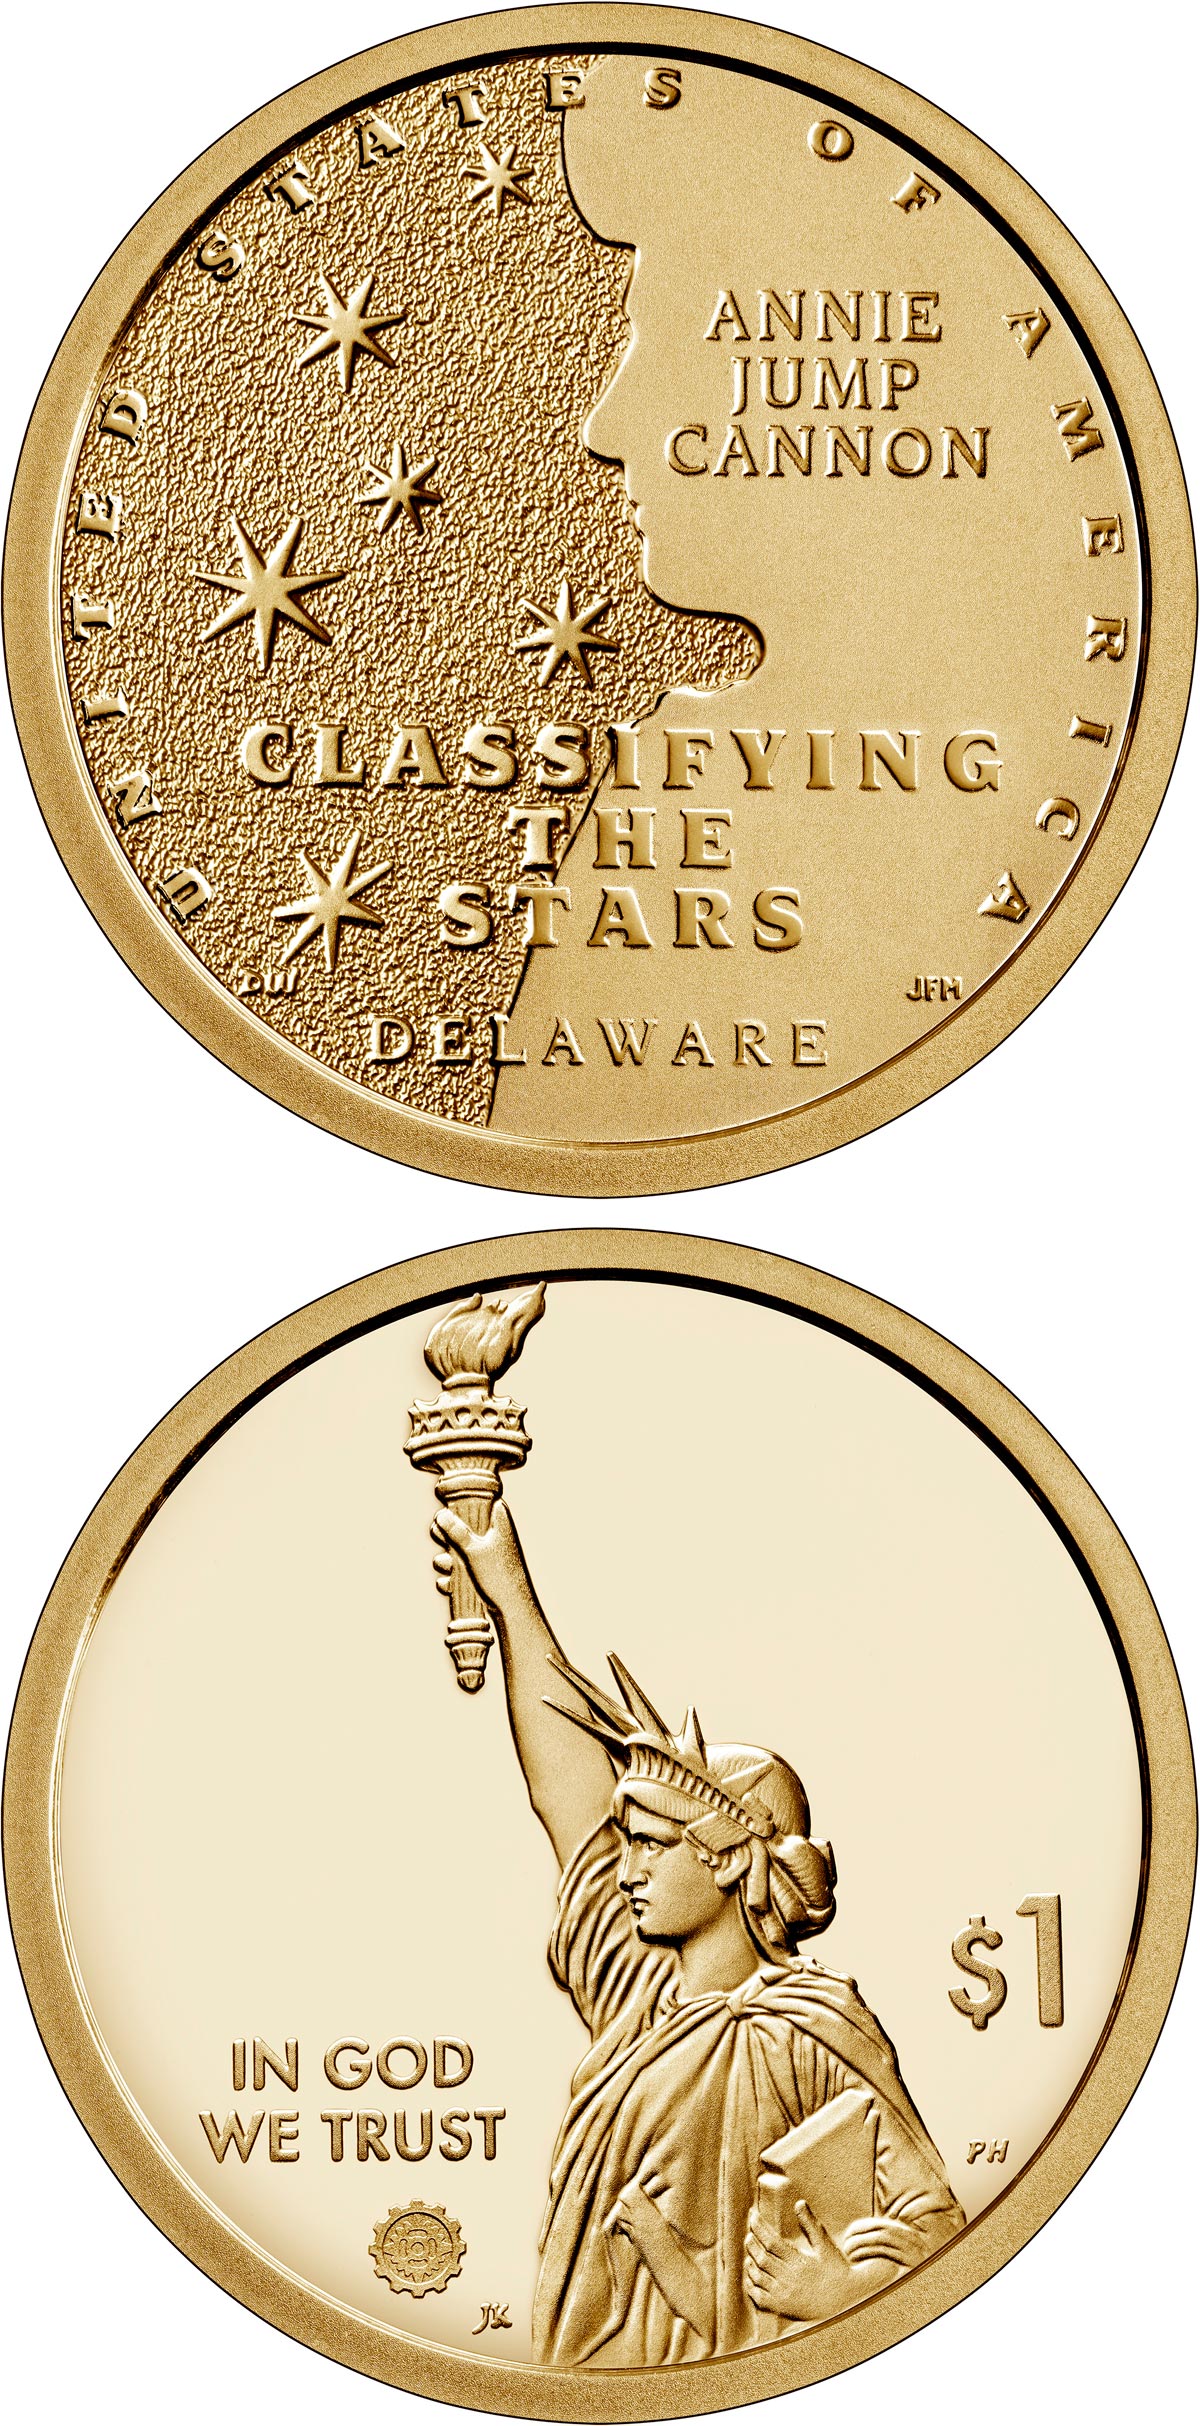 Image of 1 dollar coin - Delaware -  The System for Slassifying the Stars - Annie Jump Cannon  | USA 2019.  The Nordic gold (CuZnAl) coin is of Proof, BU, UNC quality.